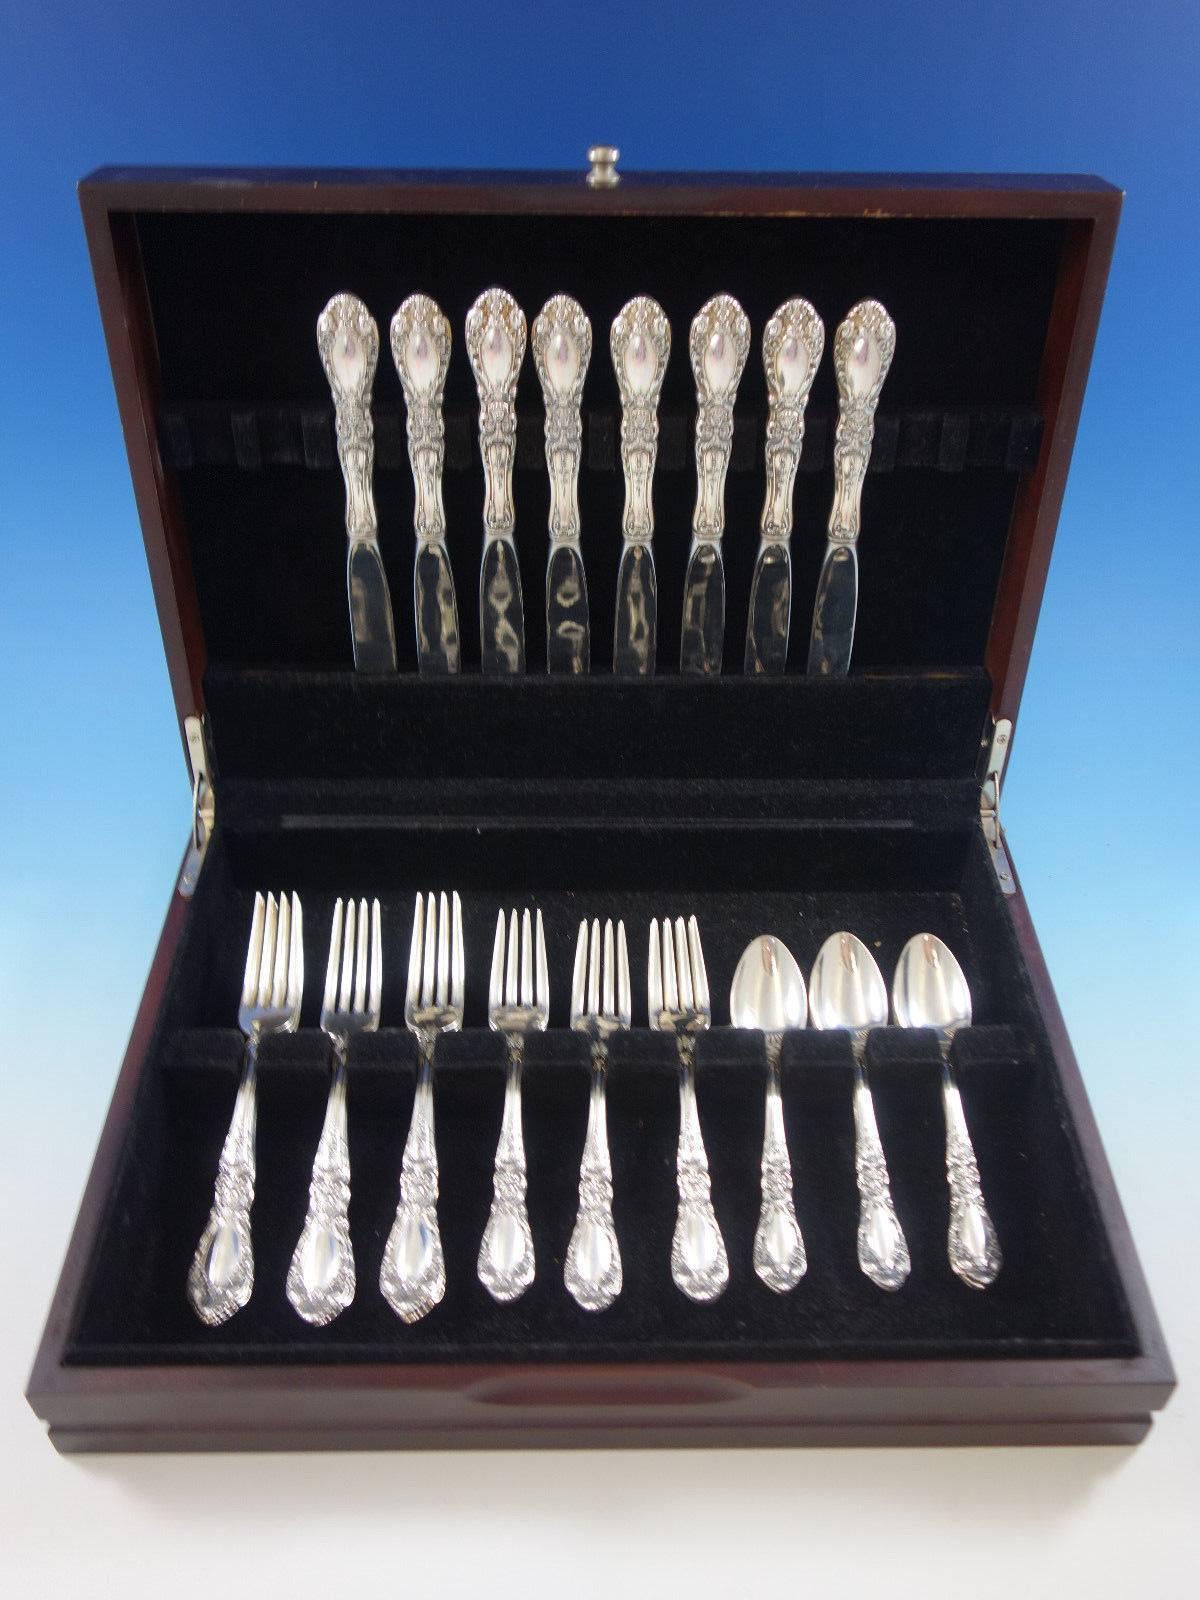 Prince Eugene by Alvin sterling silver flatware set, 32 pieces. This set includes: 

Eight knives, 8 7/8